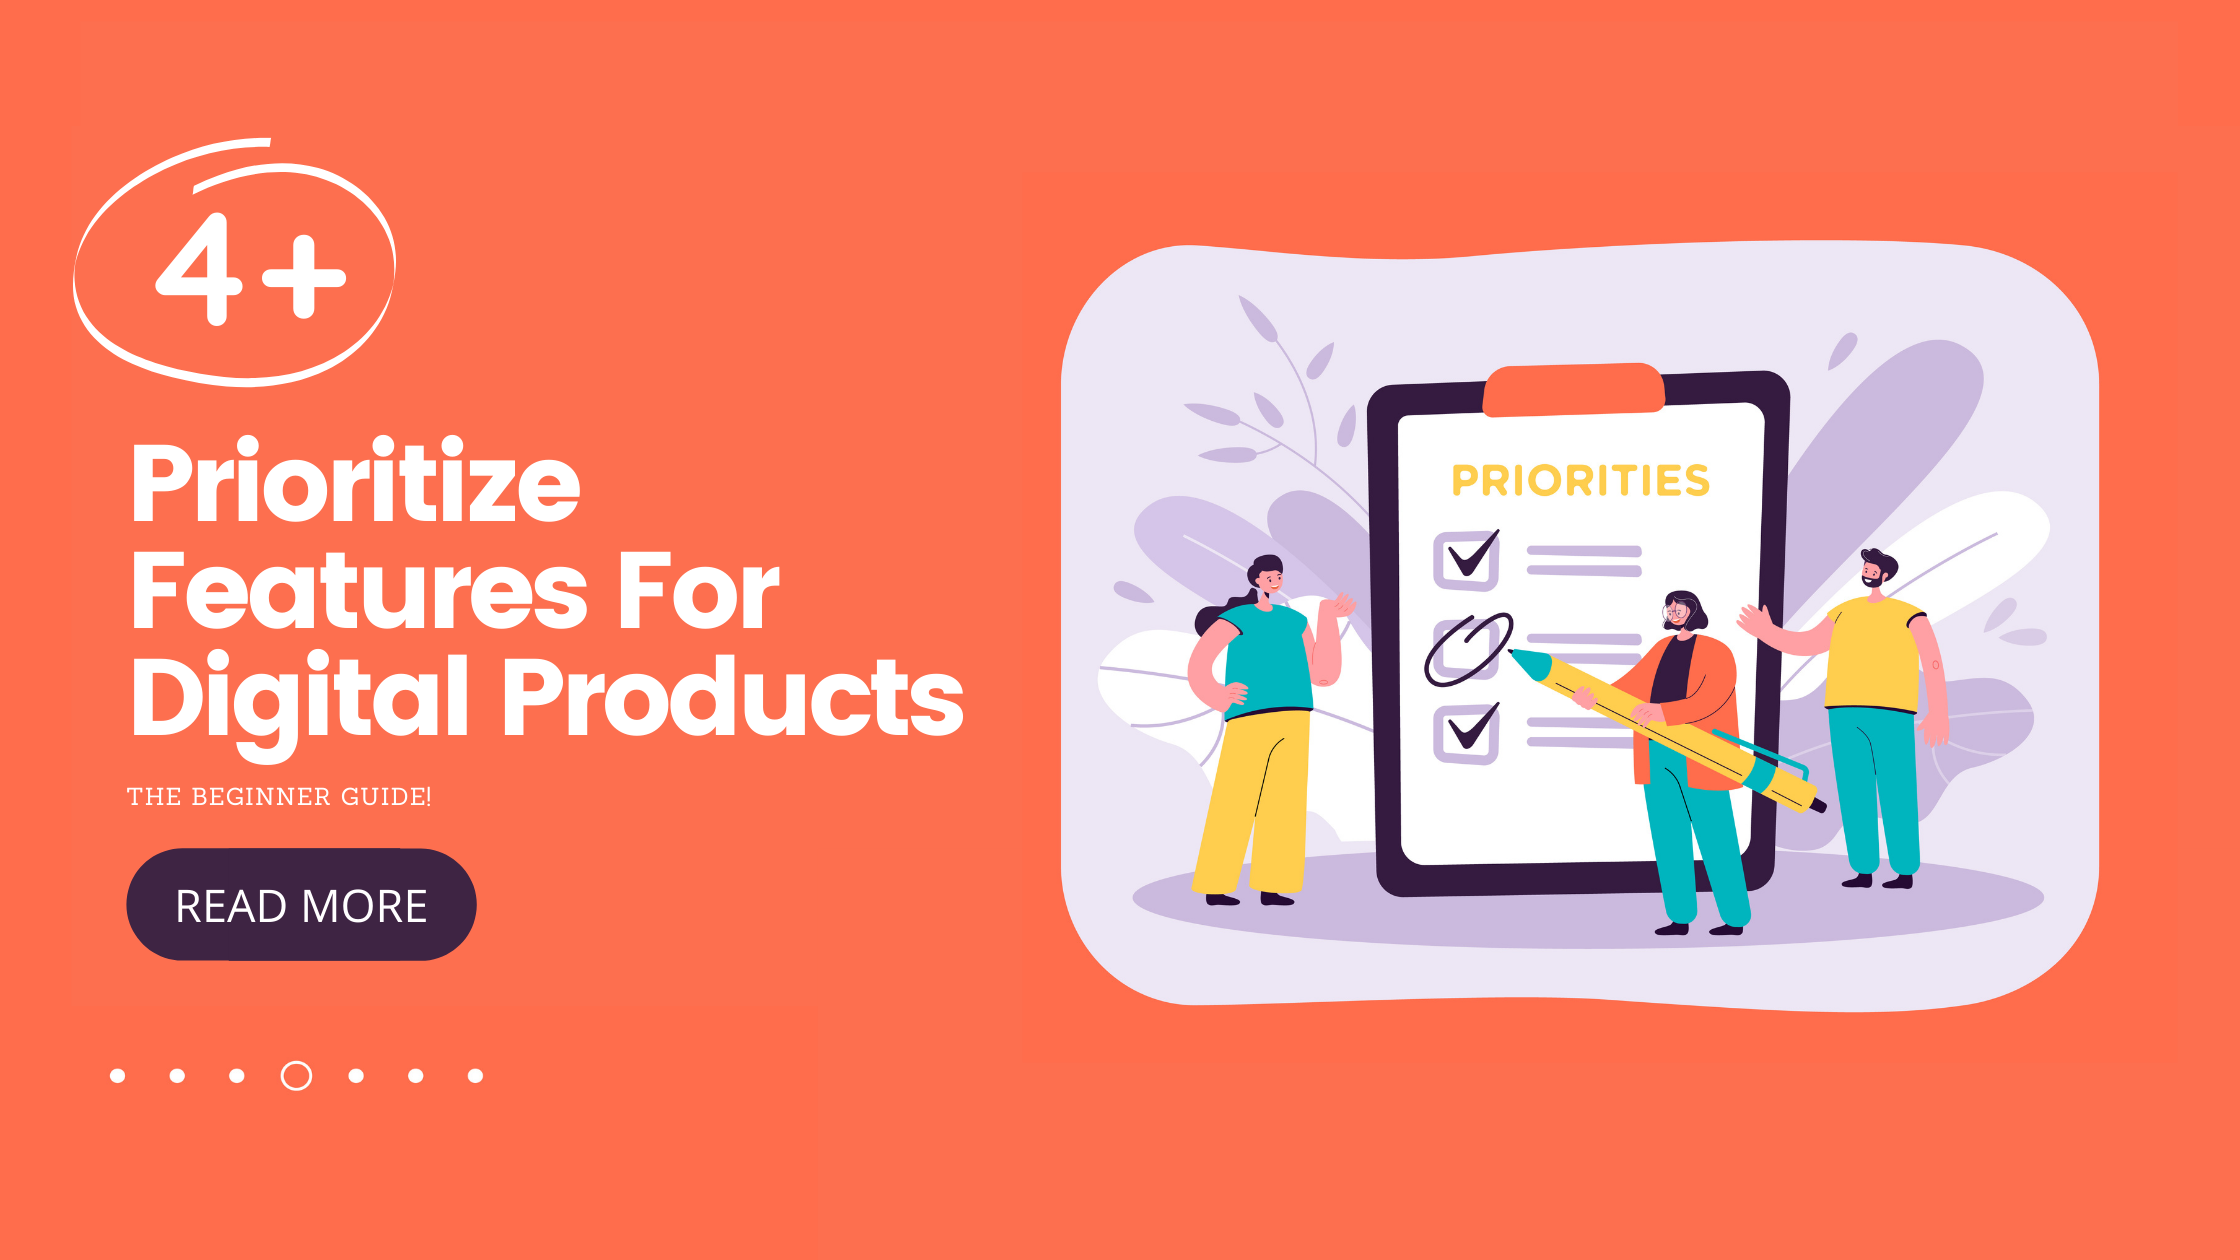 Prioritize Features For Digital Products